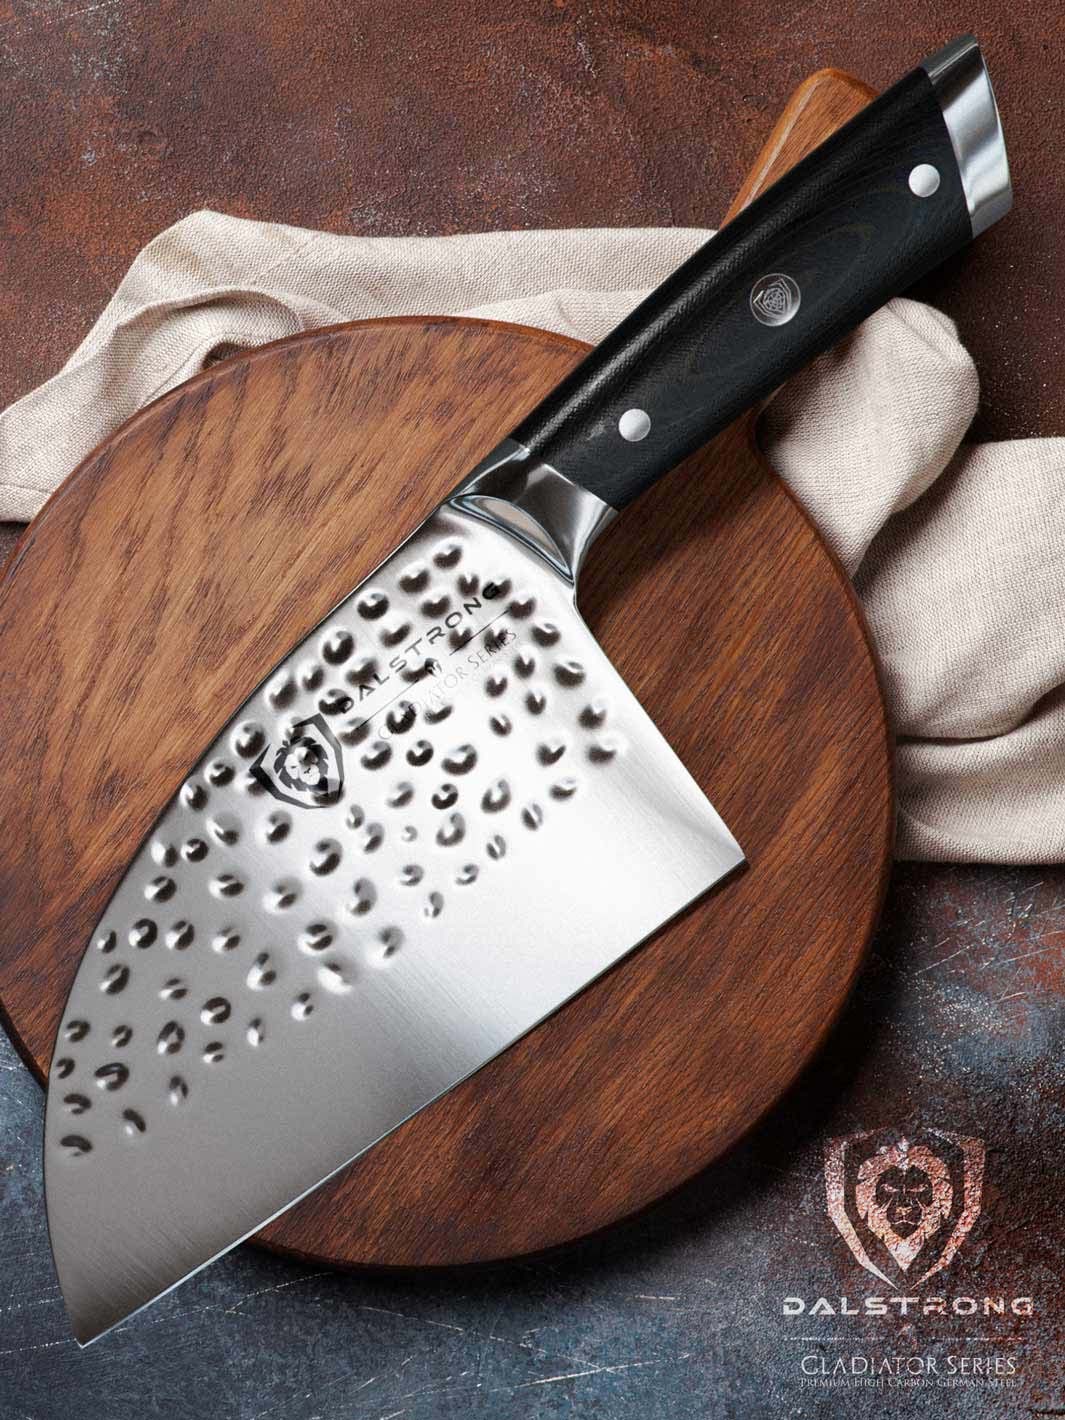 Serbian Chef's Knife 7.5" | Gladiator Series | NSF Certified | Dalstrong ©